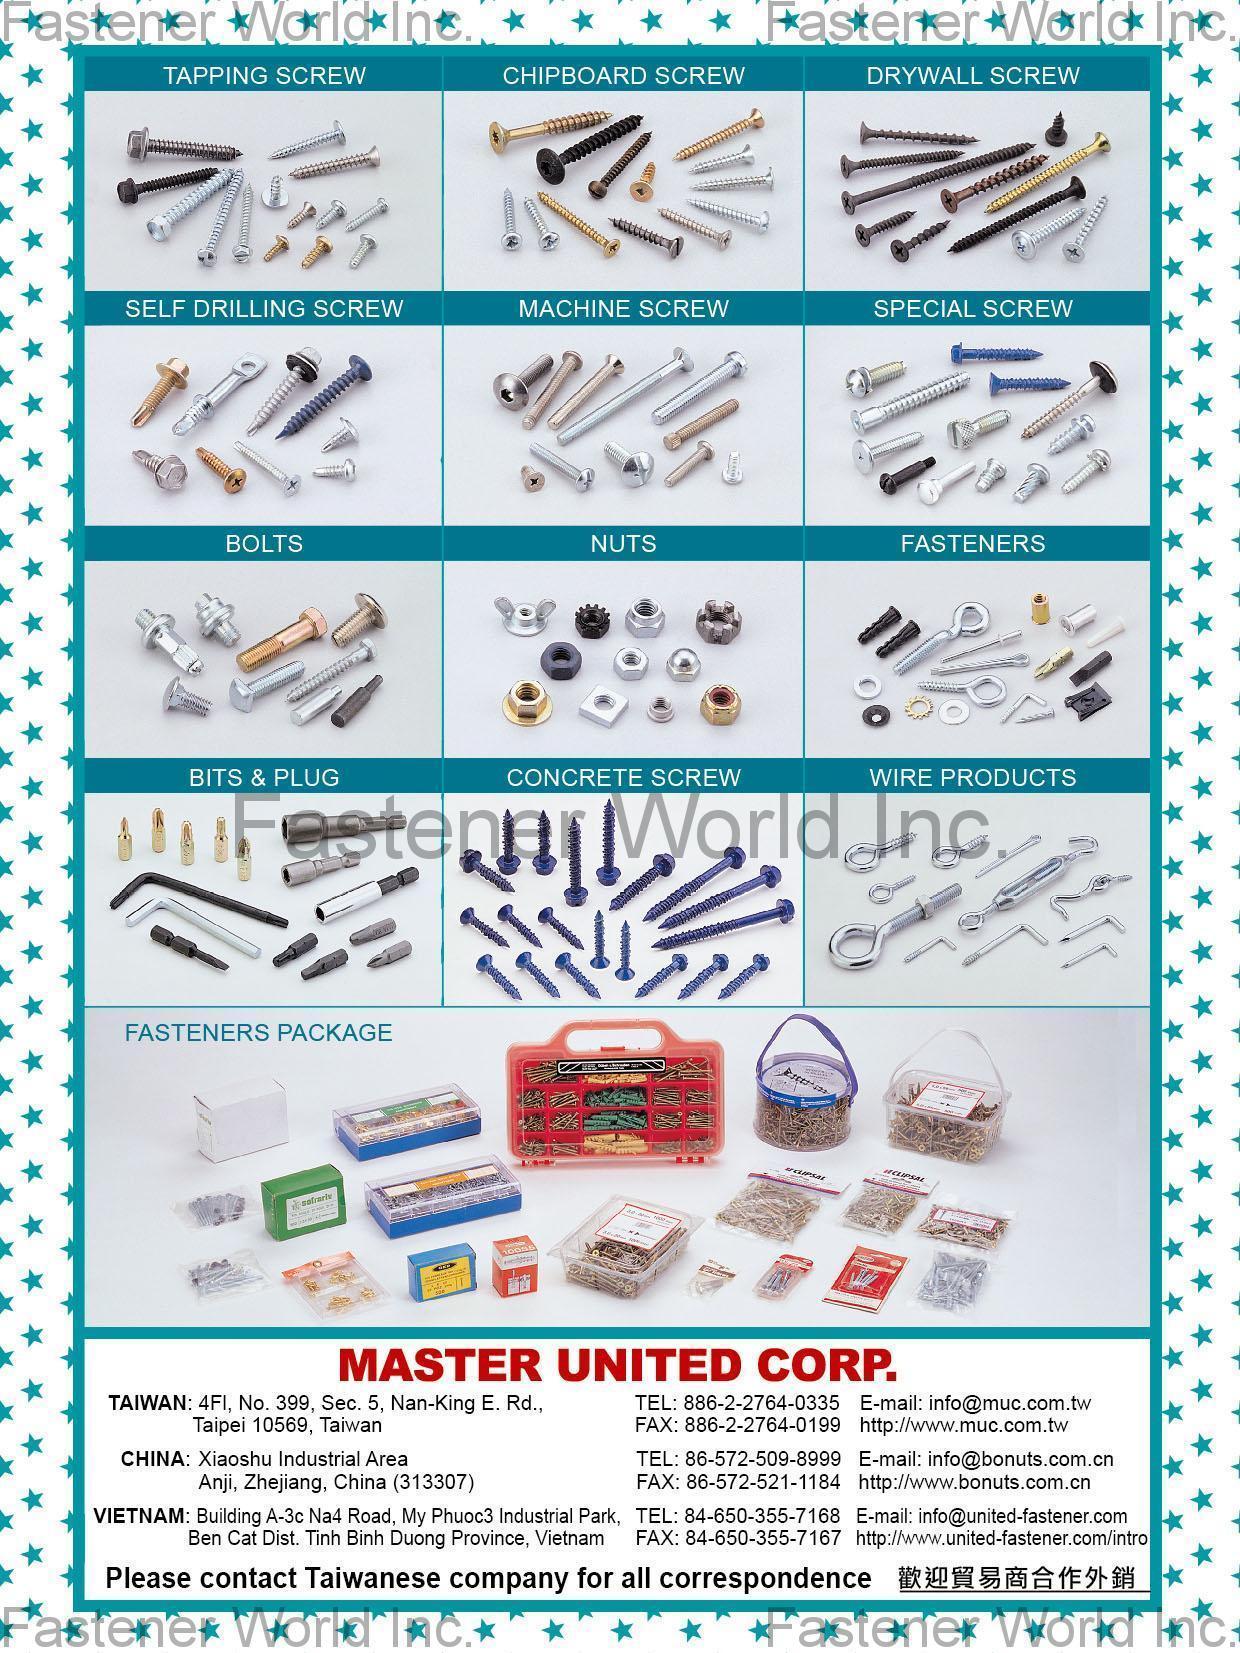 MASTER UNITED CORP.  , Tapping Screw, Chipboard Screw, Drywall Screw, Self Drilling Screw, Machine Screw, Special Screw, Bolts, Nuts, Fasteners, Bits & Plug, Concrete Screw, Wire Products, Fasteners Package , Tapping Screws